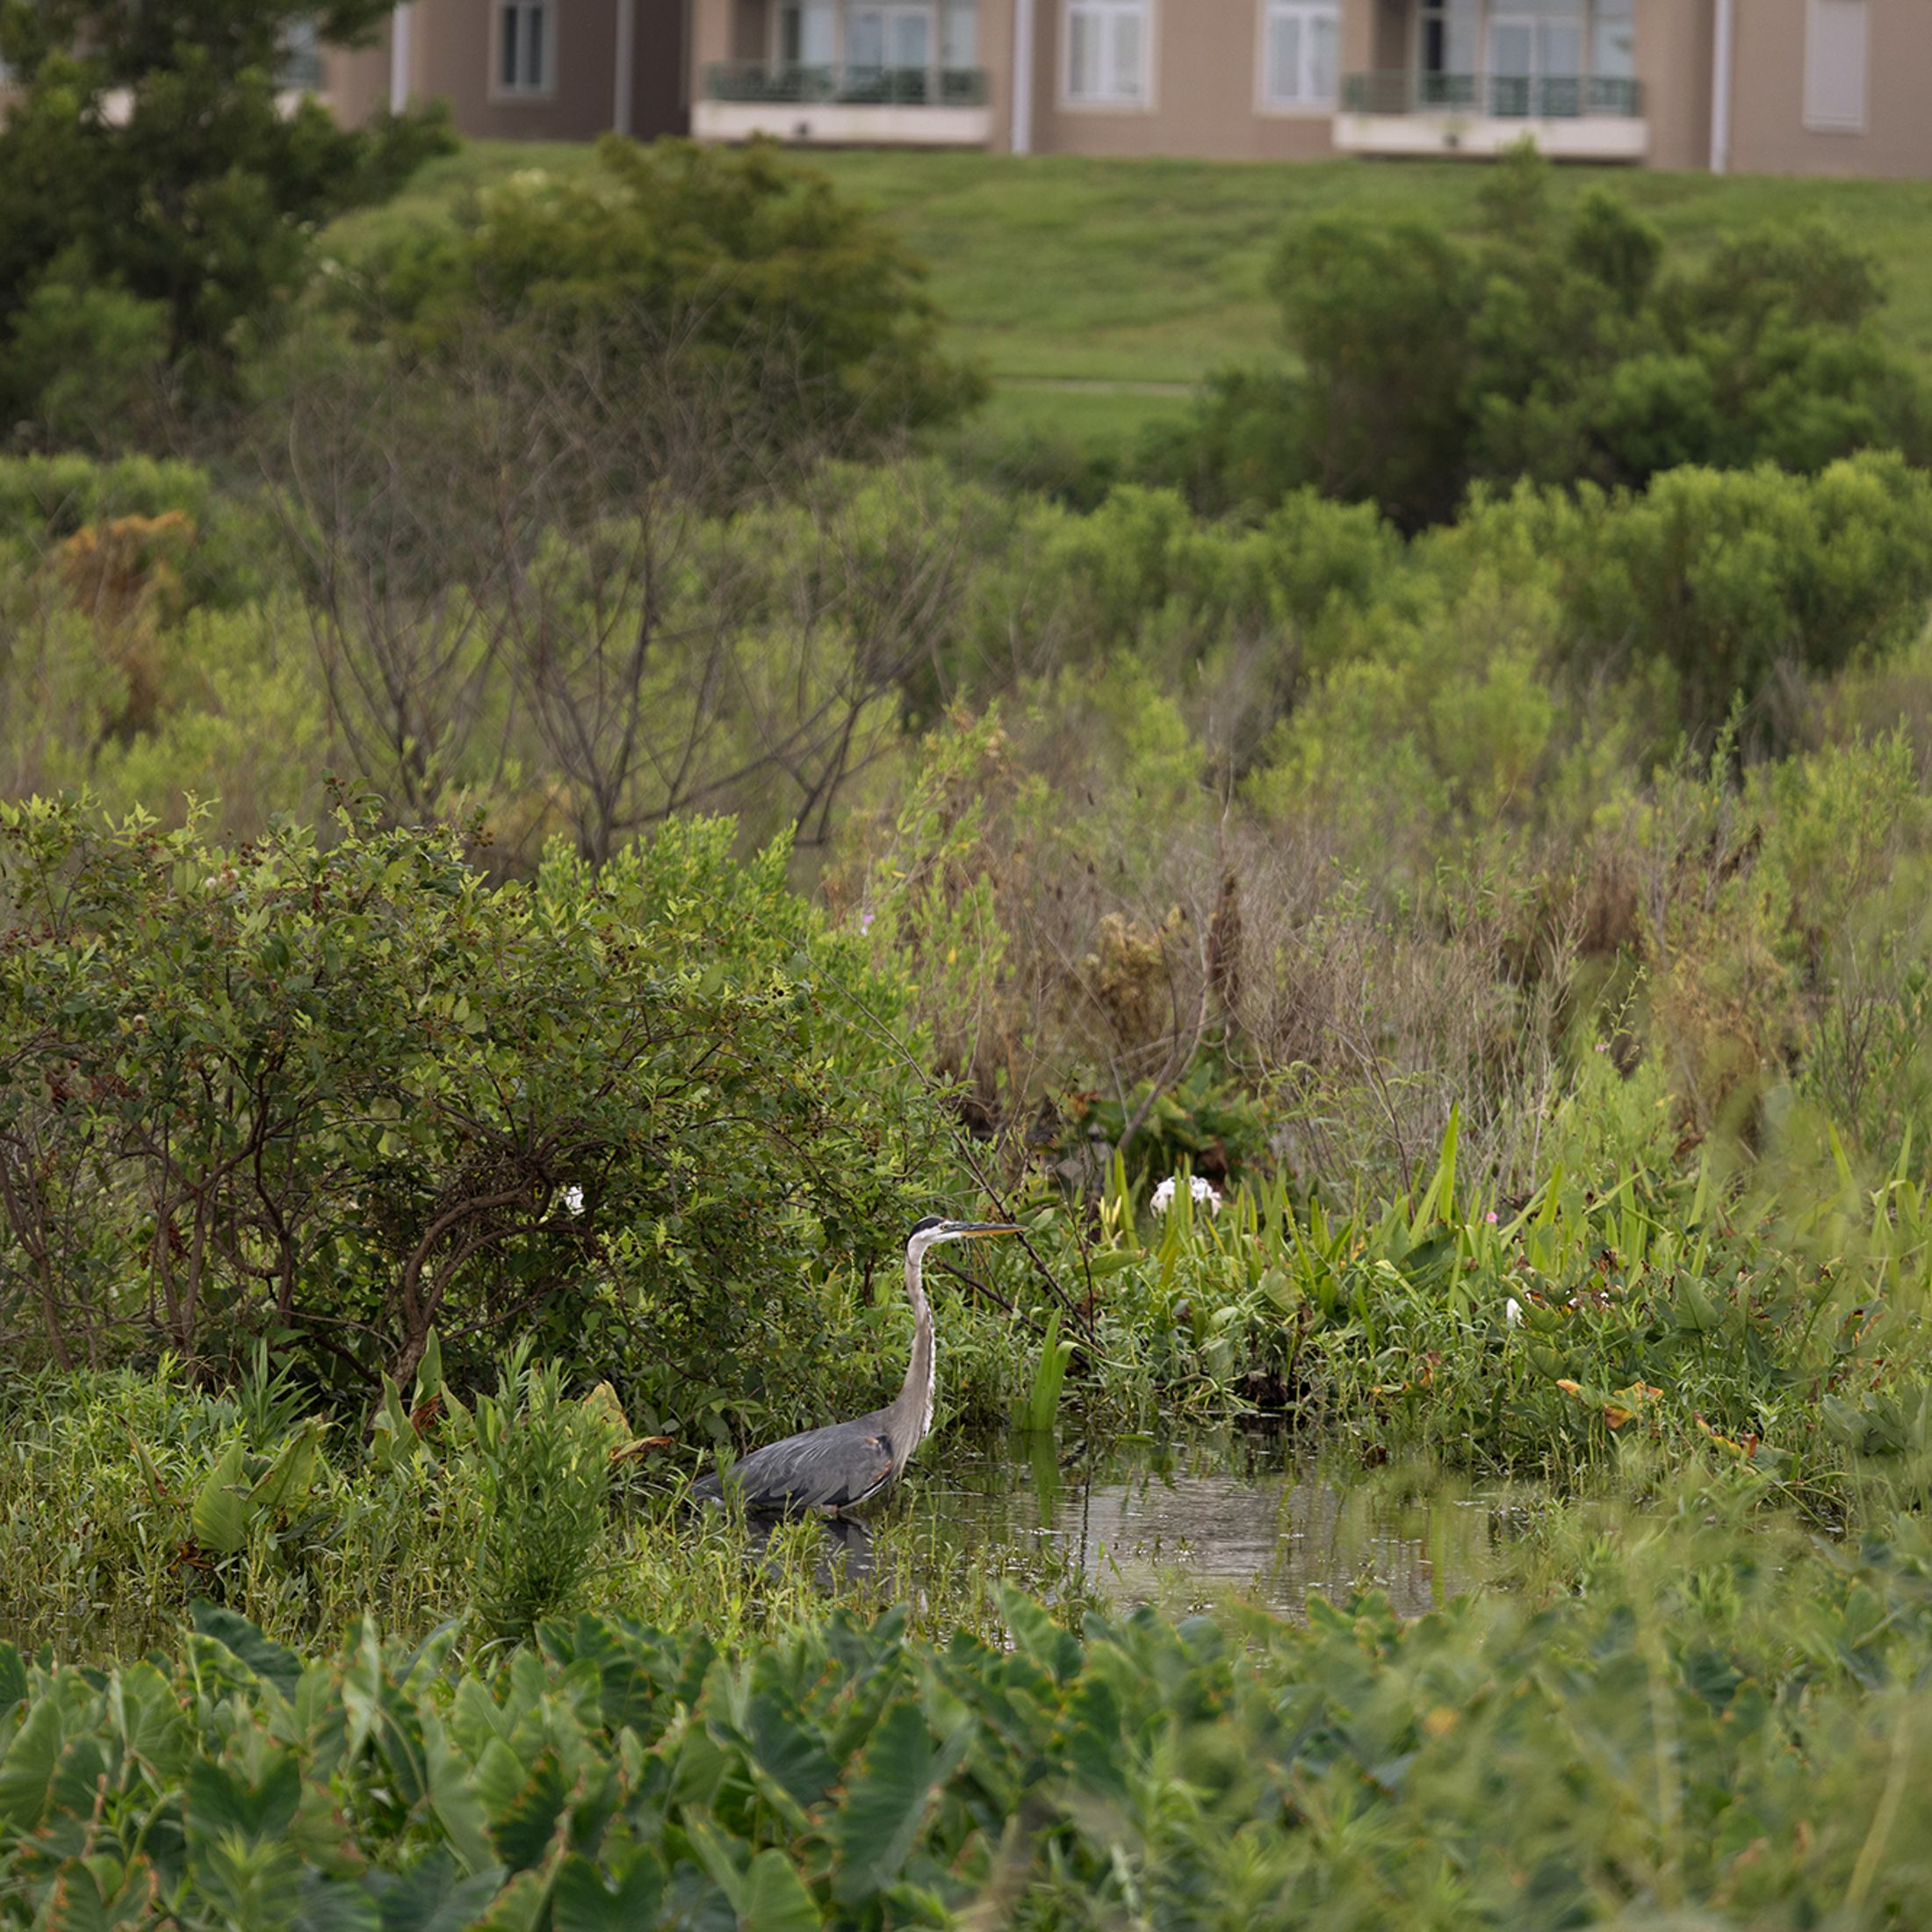 A blue heron wades through the vegetation of a restored wetland in Jefferson Parish, Louisiana. In the background the grassy levee and brick buildings are visible.